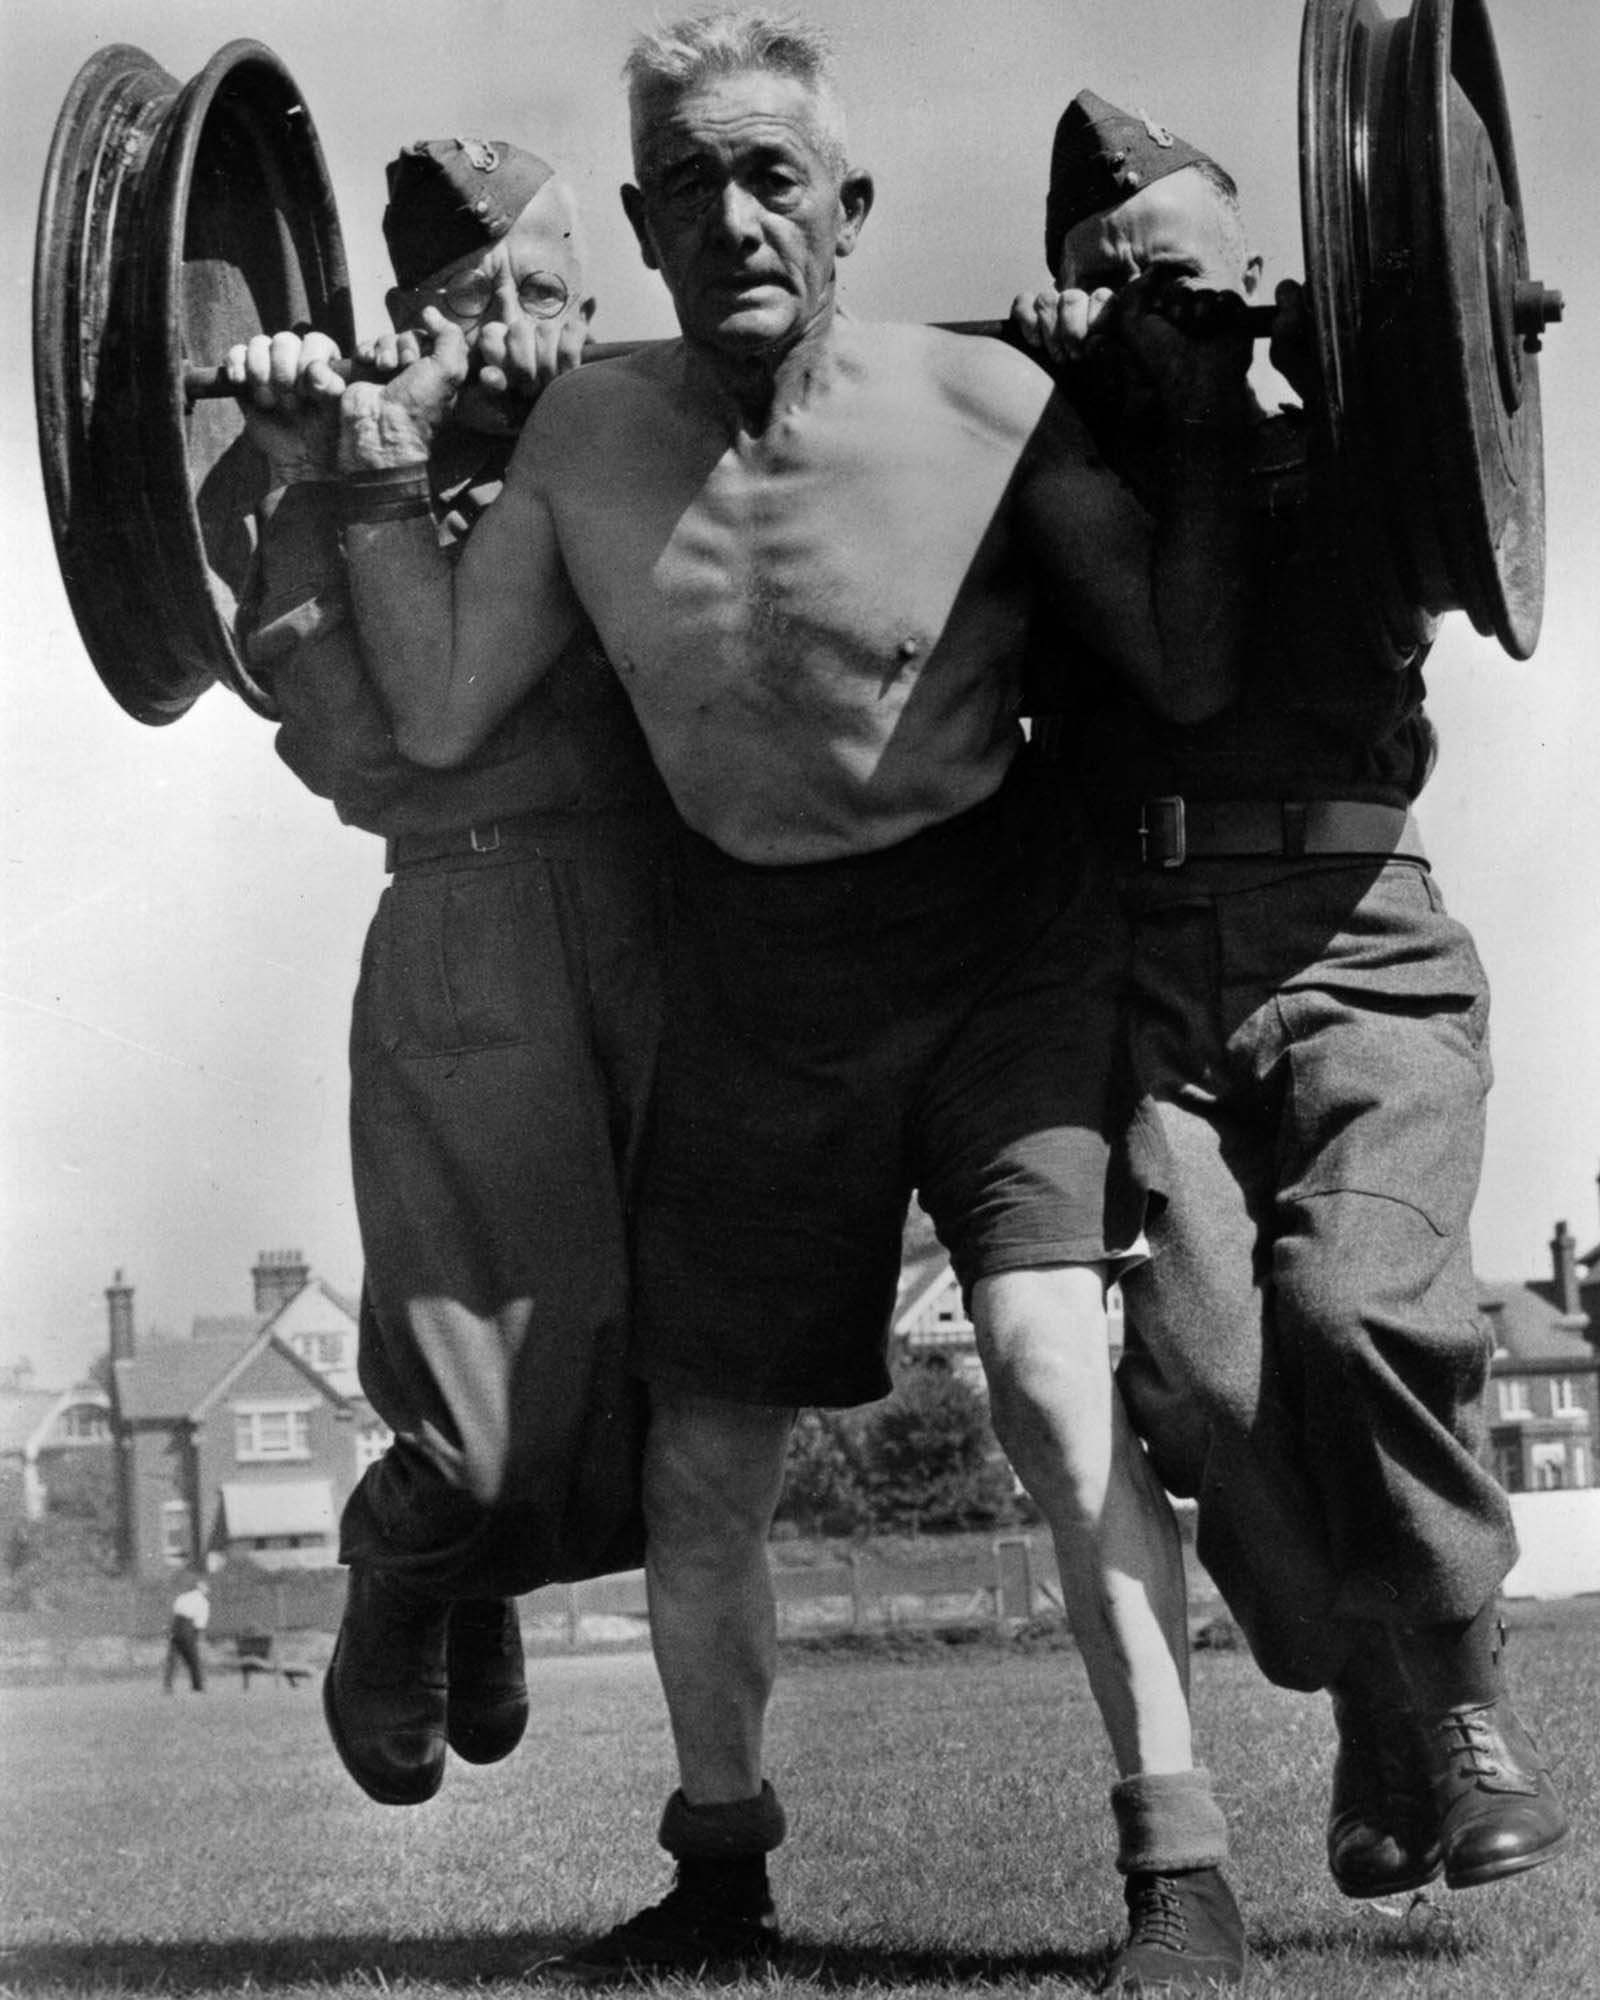 A 60-year-old British soldier lifts 500 pounds of man and steel, 1941.